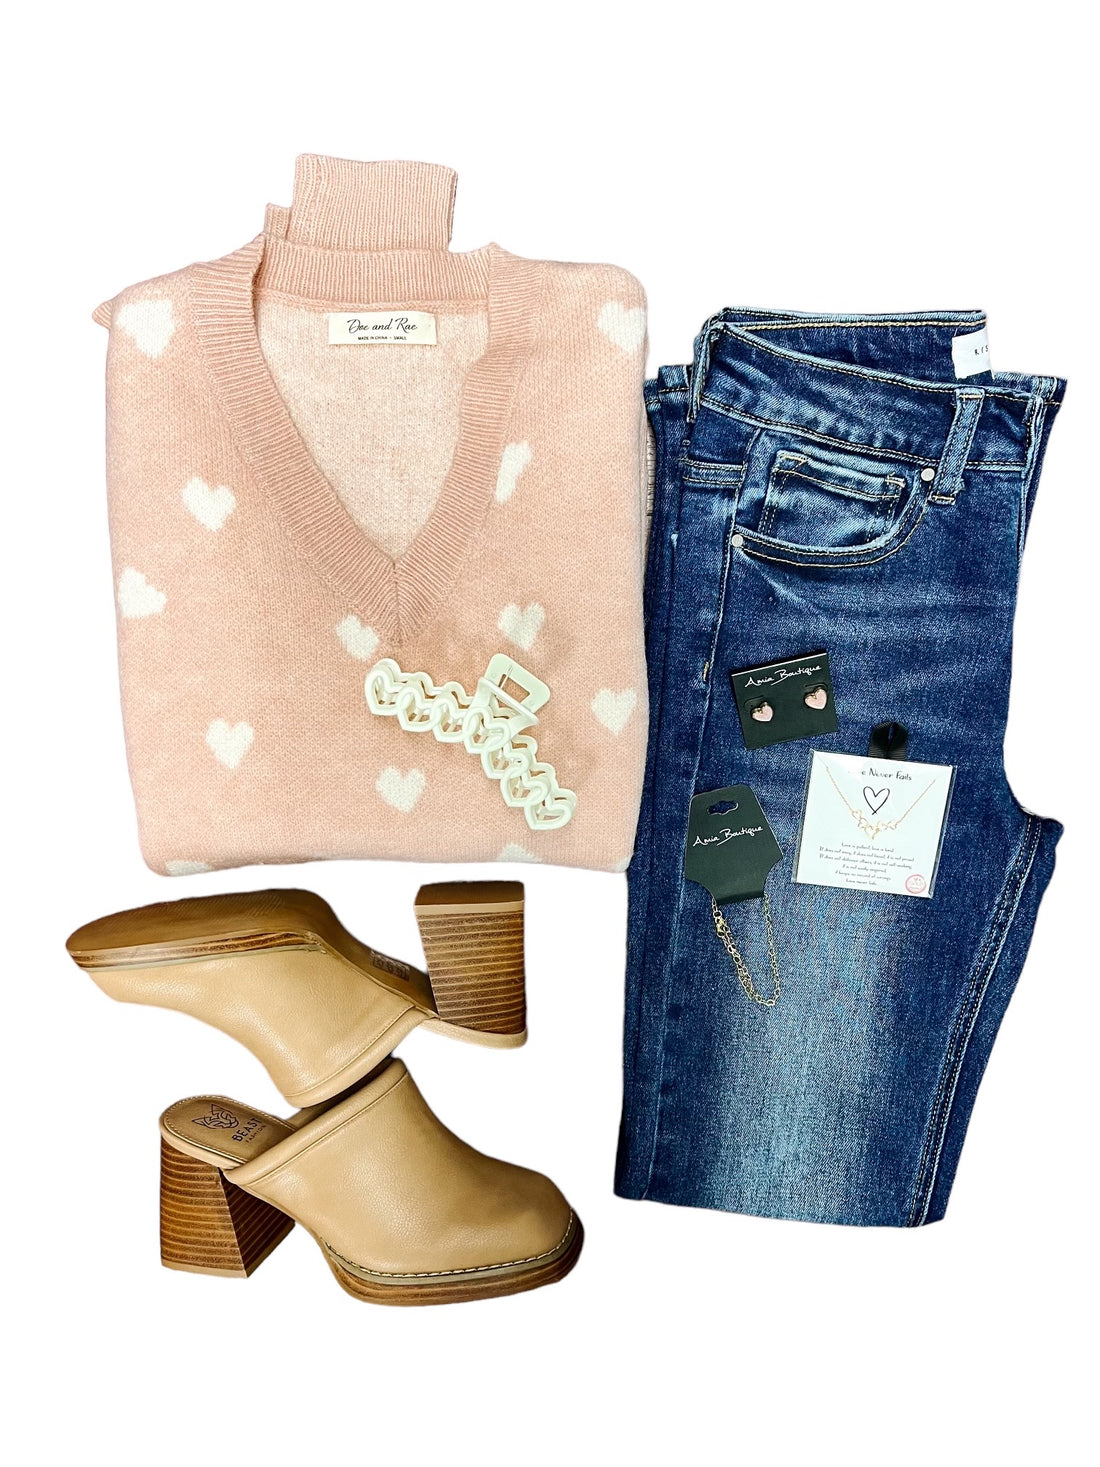 All Hearts In Blush Sweater